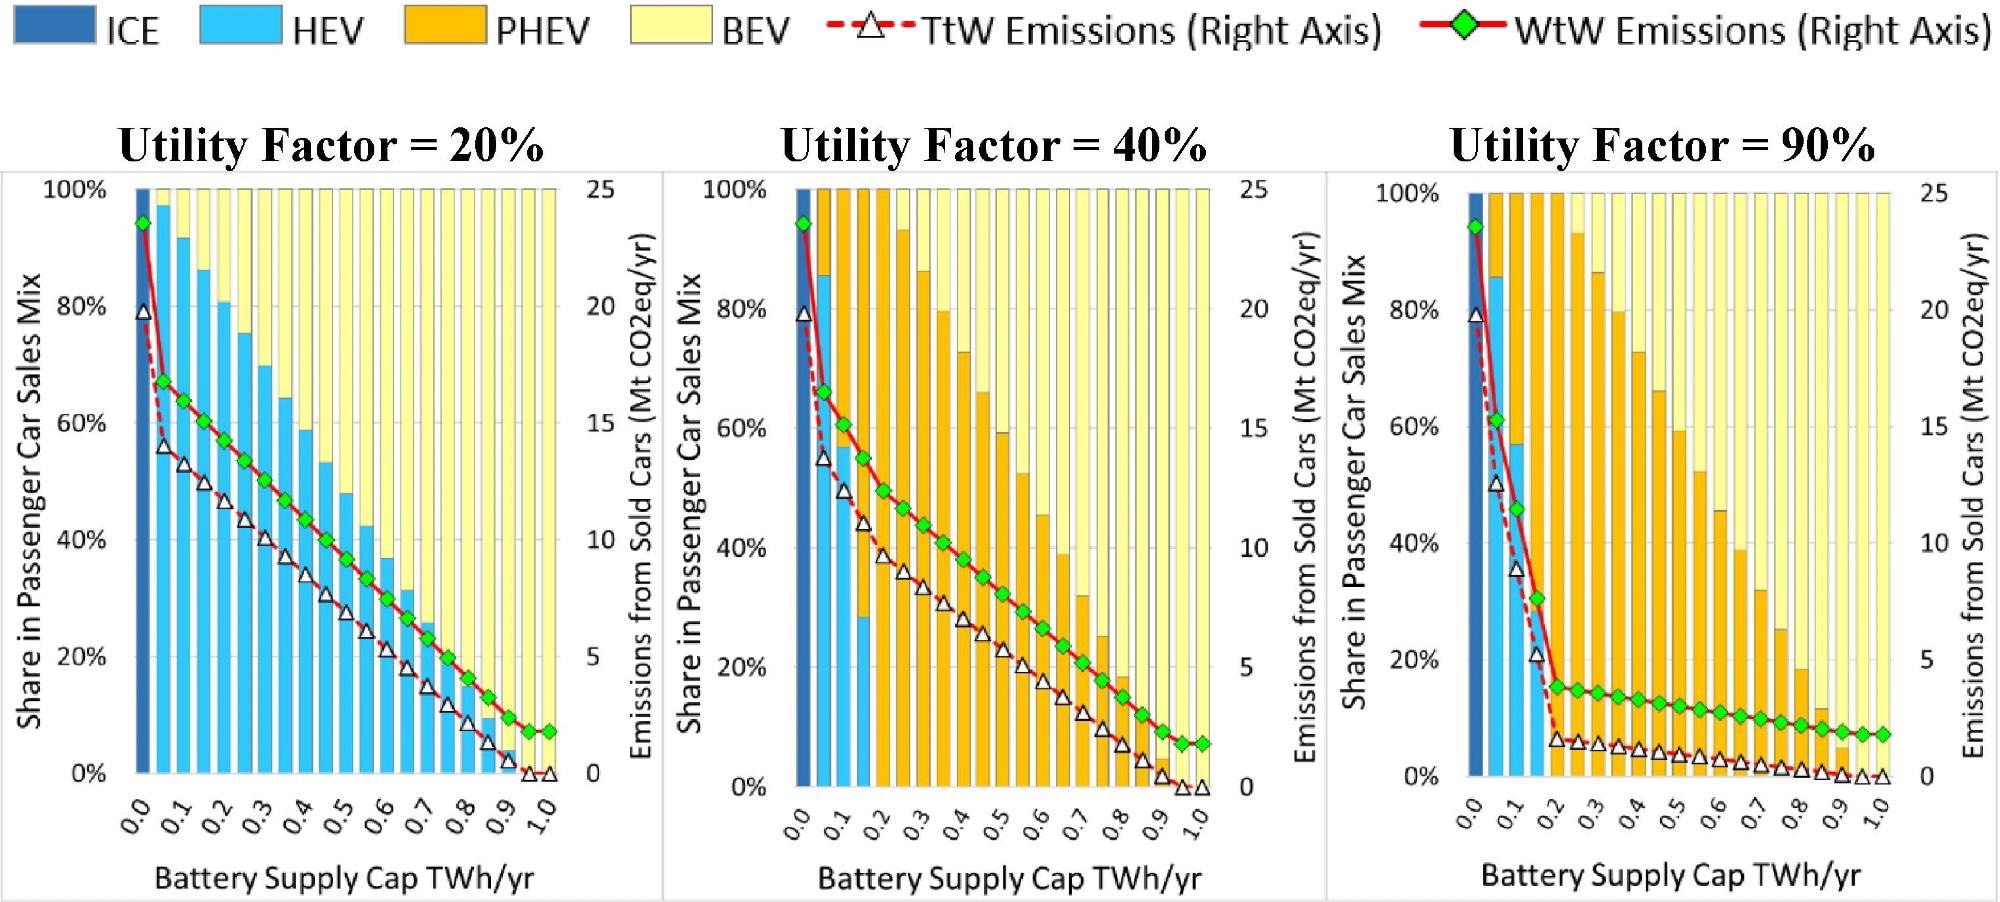 Optimal vehicle sales mix minimizing WTW GHG emissions subject to battery supply cap in 2030 with break-even point being 30% — Baseline results assuming fixed battery sizes of 1.54 kWh (HEV), 12.5 kWh (PHEV-60), and 58.4 kWh (BEV-400).